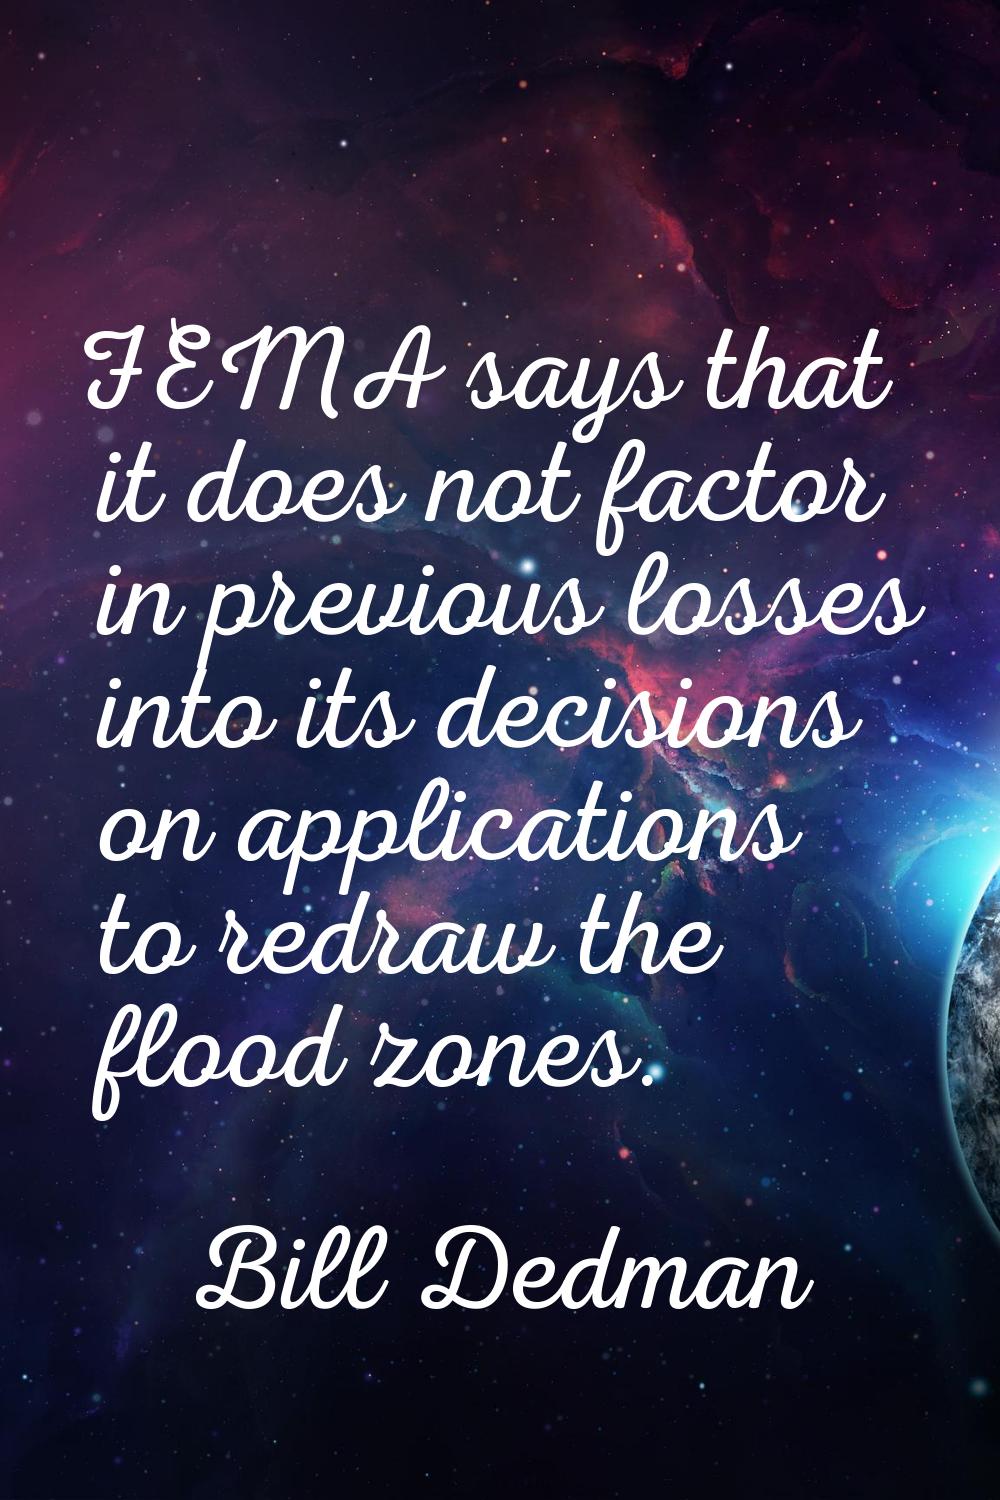 FEMA says that it does not factor in previous losses into its decisions on applications to redraw t